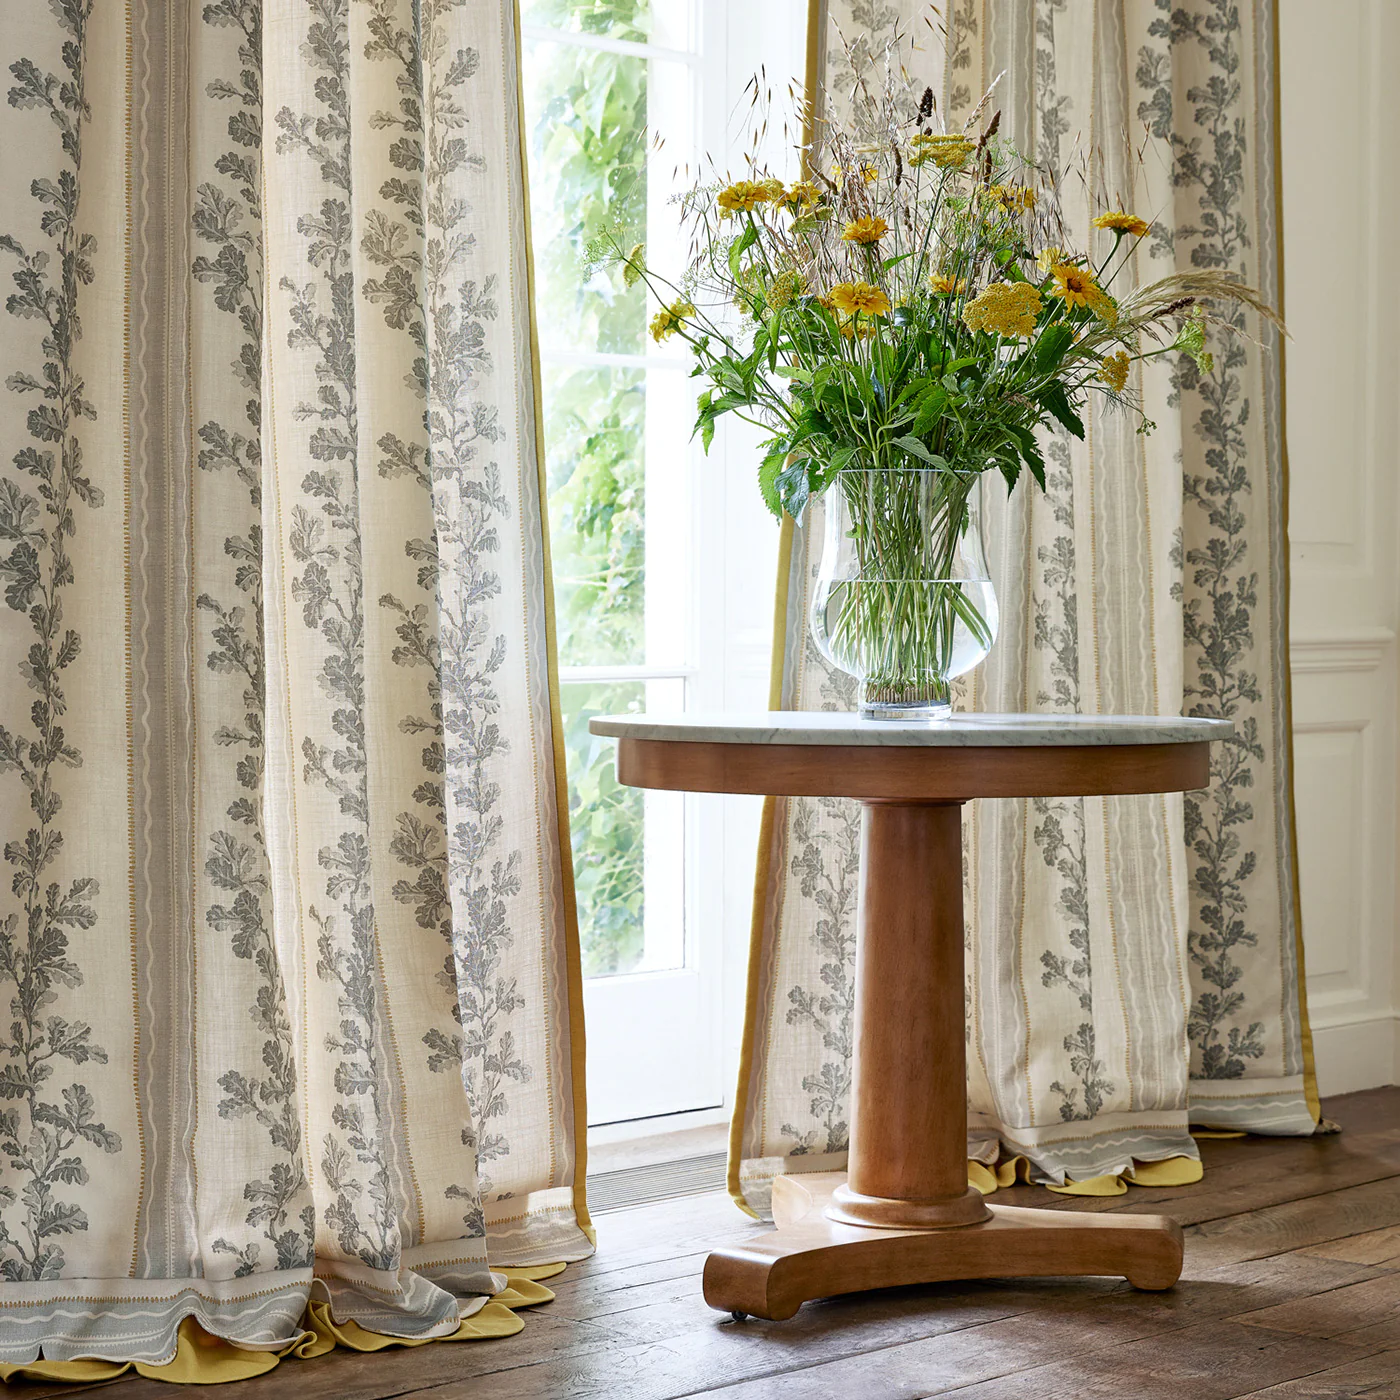 English Curtains: Explore the Finest Quality Window Treatments